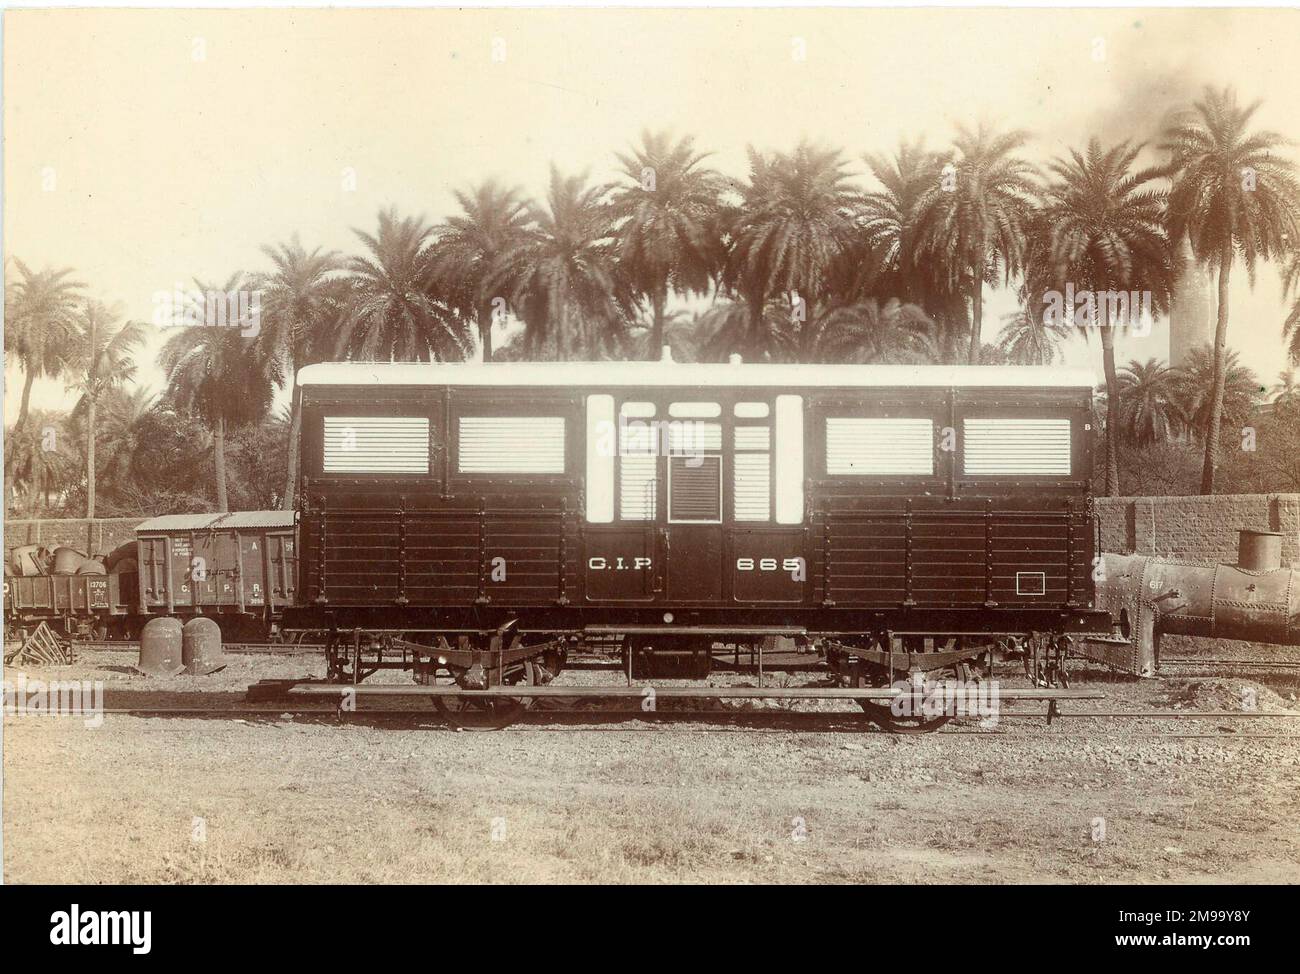 Horse box 665, rolling stock photograph. Inscribed verso 'New horse box built at Parel to carry 6 horses. Steel underframe'. Stock Photo